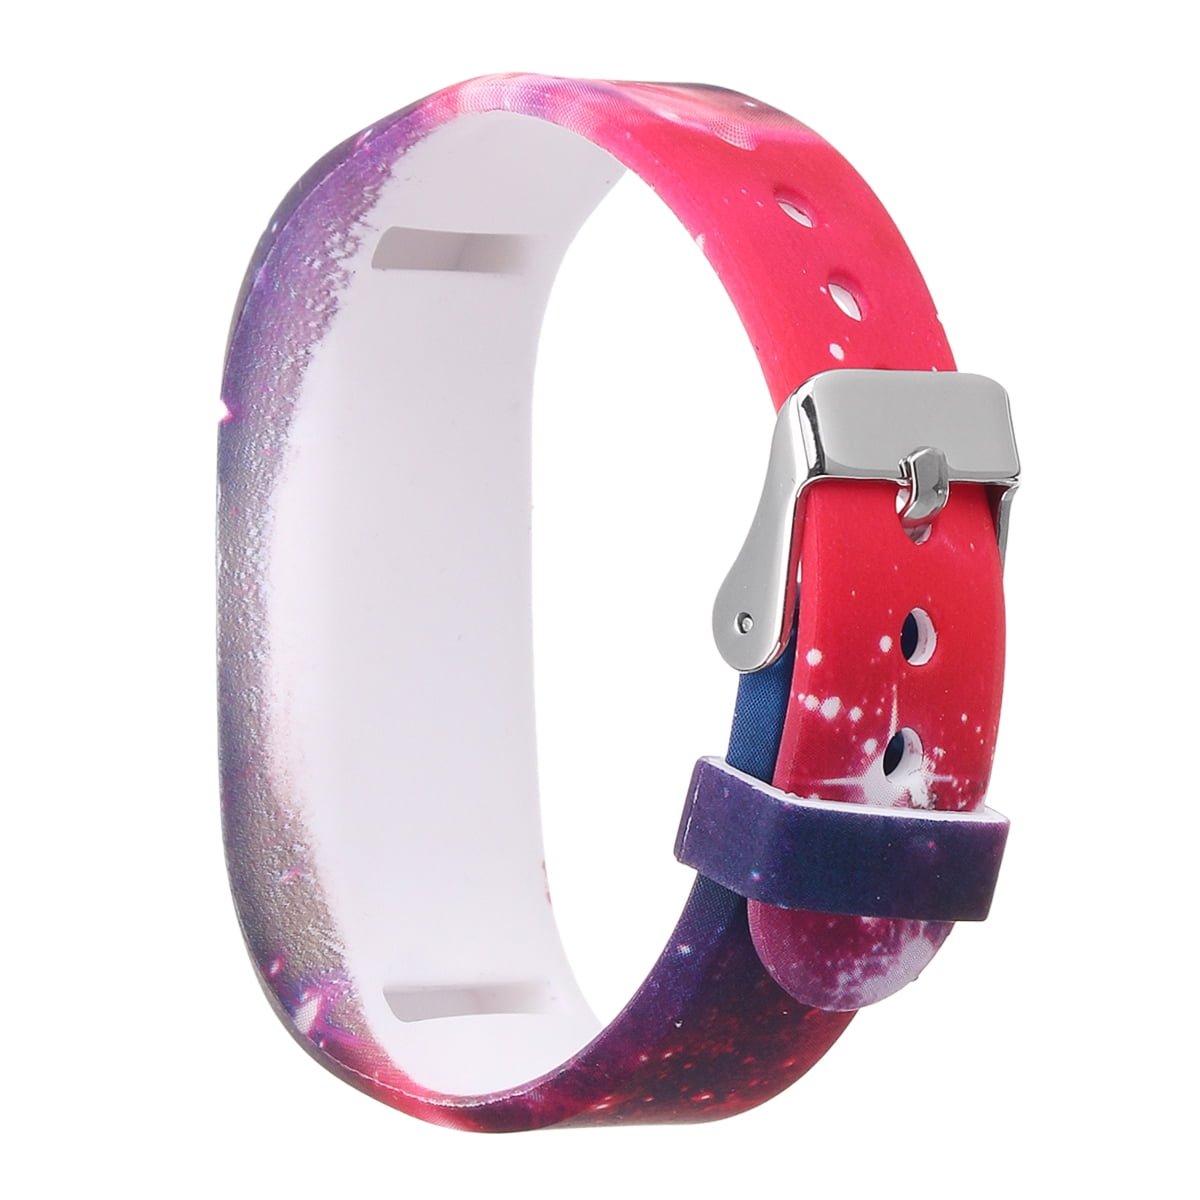 Sport Replacement Silicone Band Wrist 